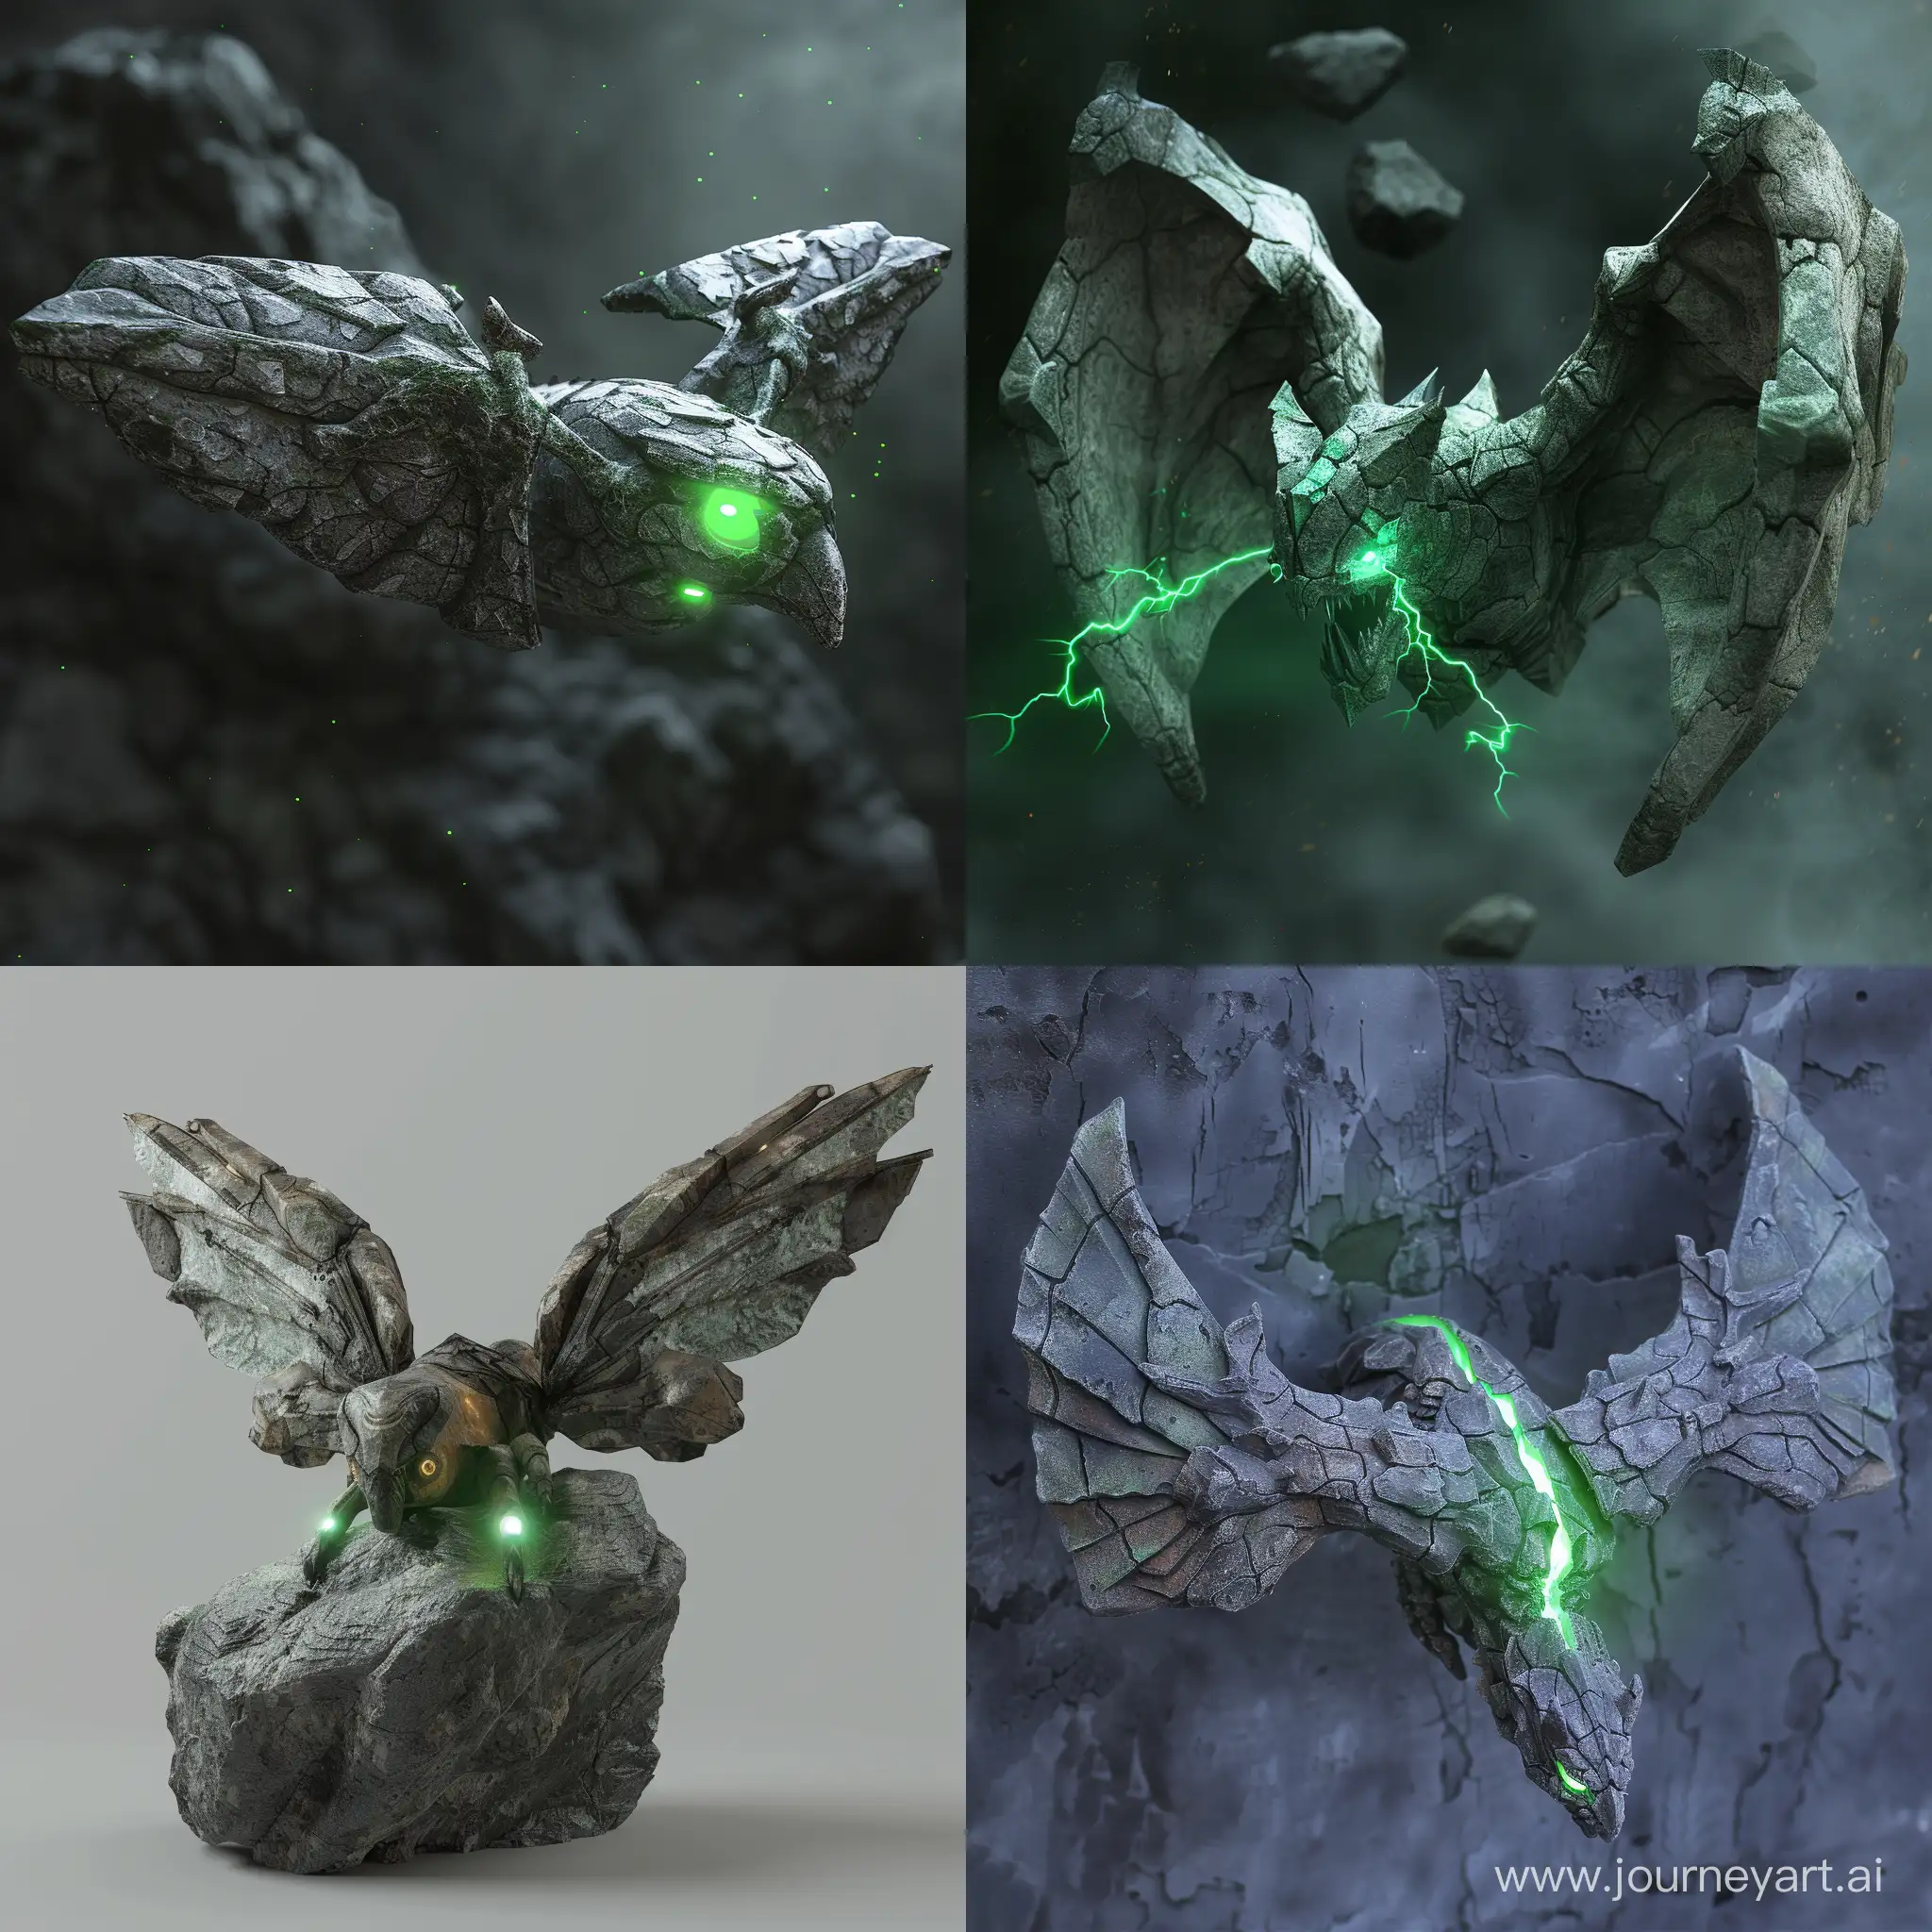 Glowing-Green-Stone-Creature-Soars-Through-the-Sky